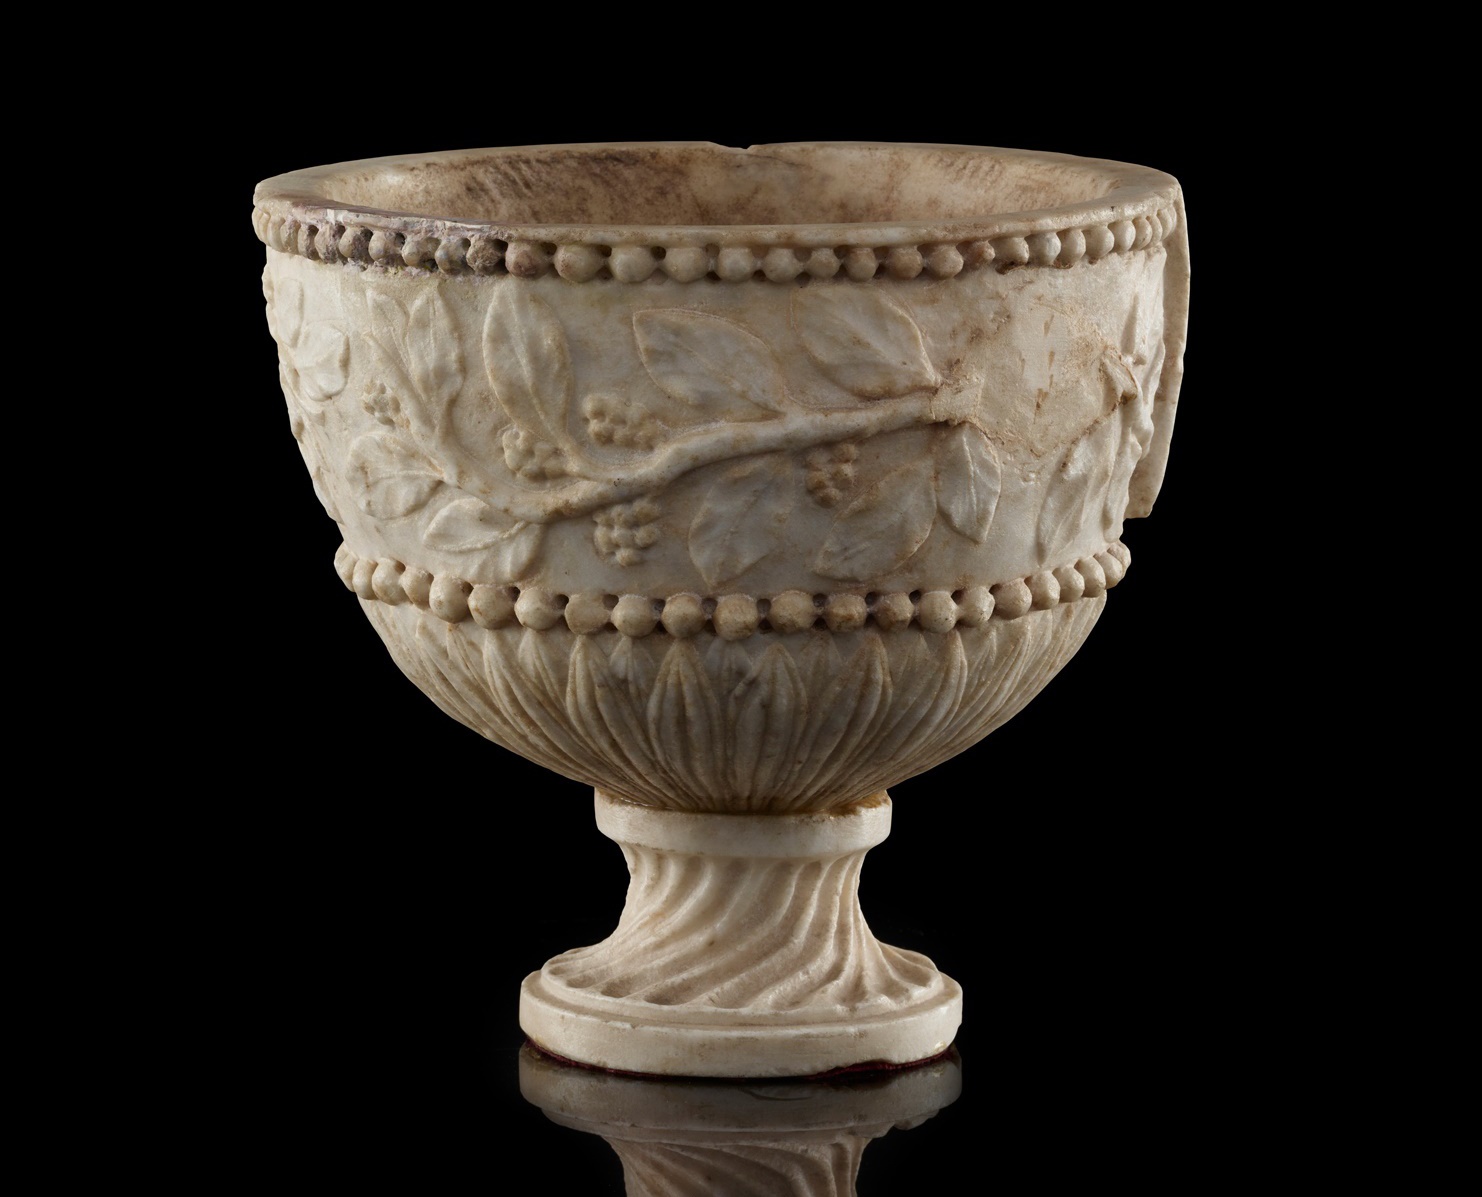 LOT 551 | ROMAN CARVED MARBLE CINERARY URN 1ST CENTURY A. D., WITH LATER ADDITIONS | £8,000 - £12,000 + fees